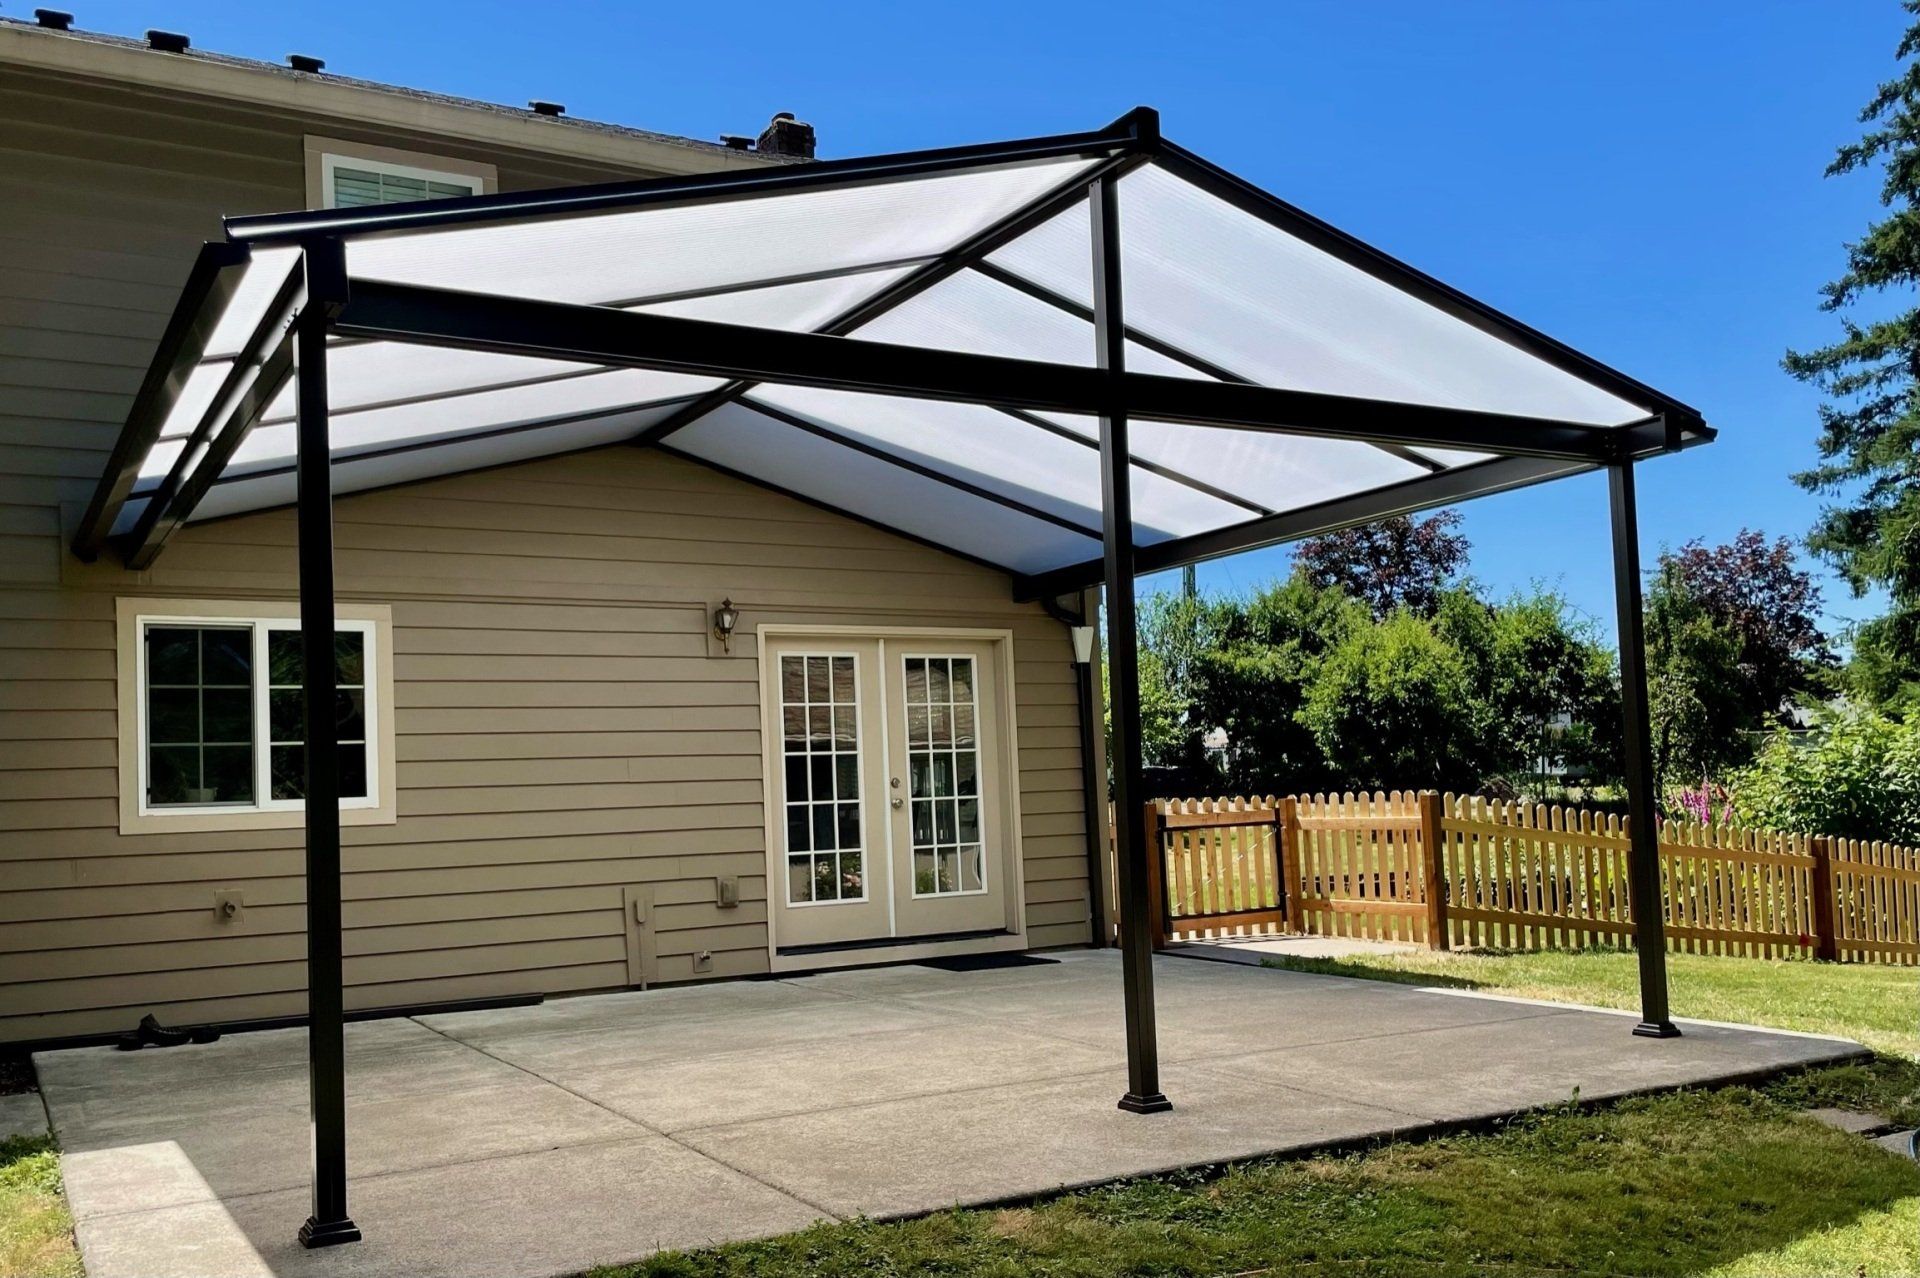 Patio Covers in Tigard Oregon - Gable Roof with ACRYLITE Acrylic